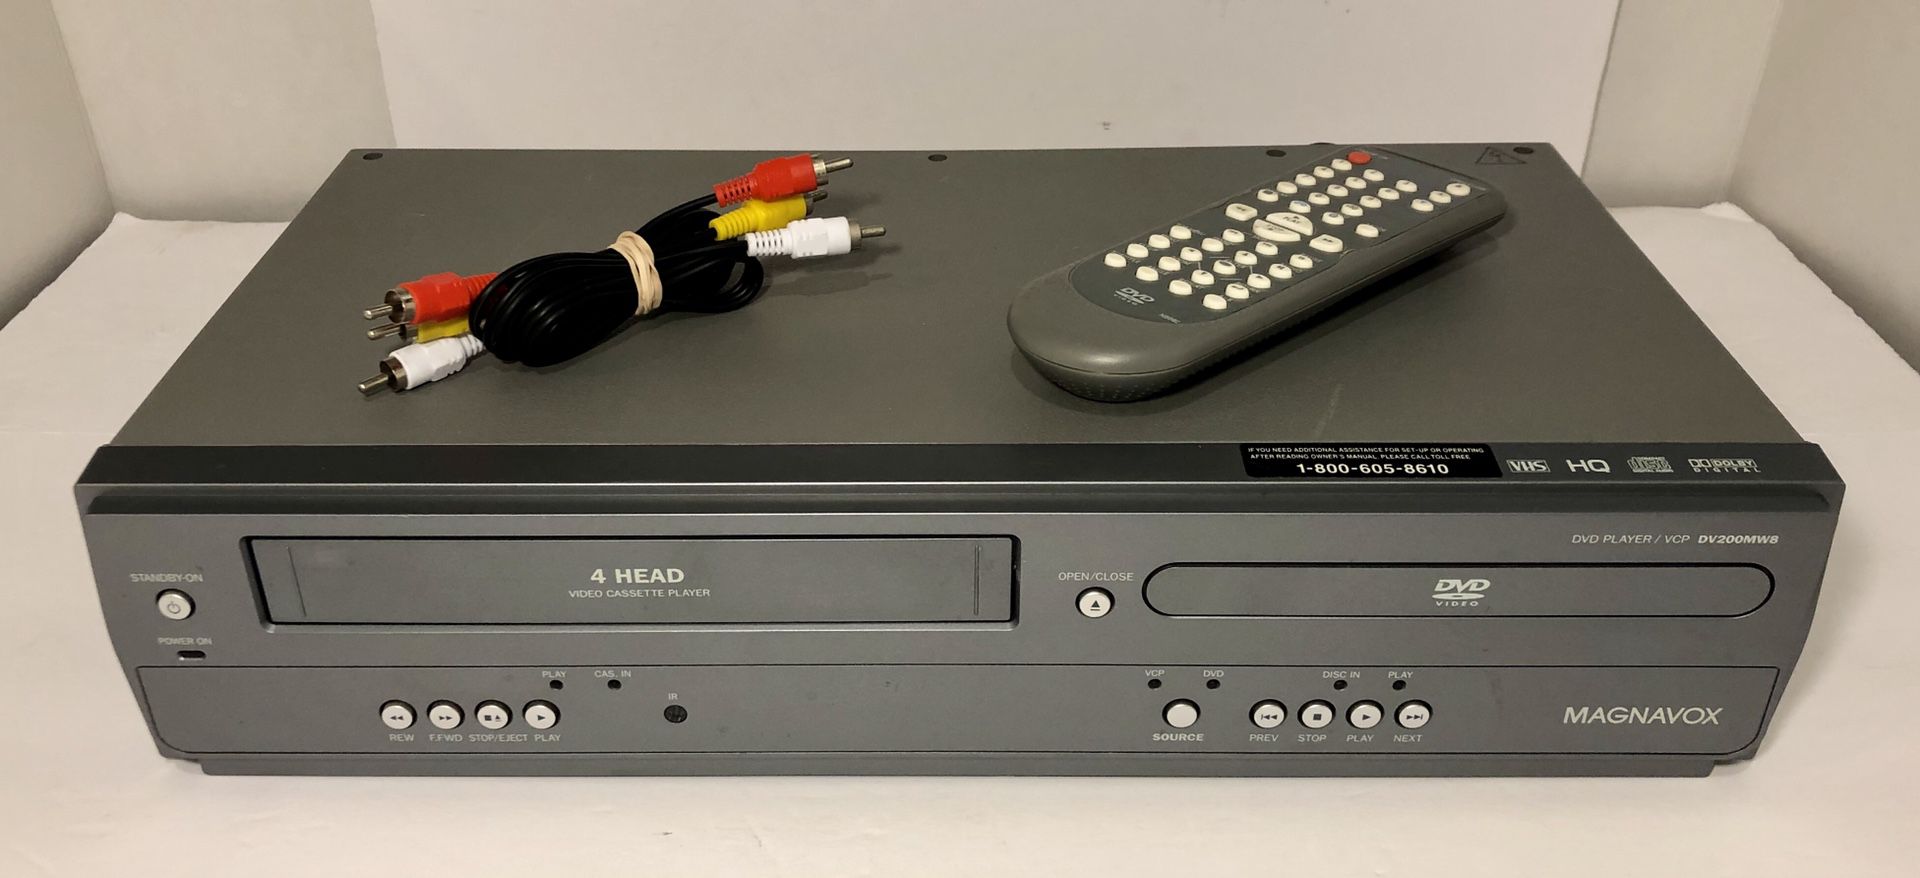 Magnavox DV200MW8 DVD Player & VCR VHS Player With Remote - Tested